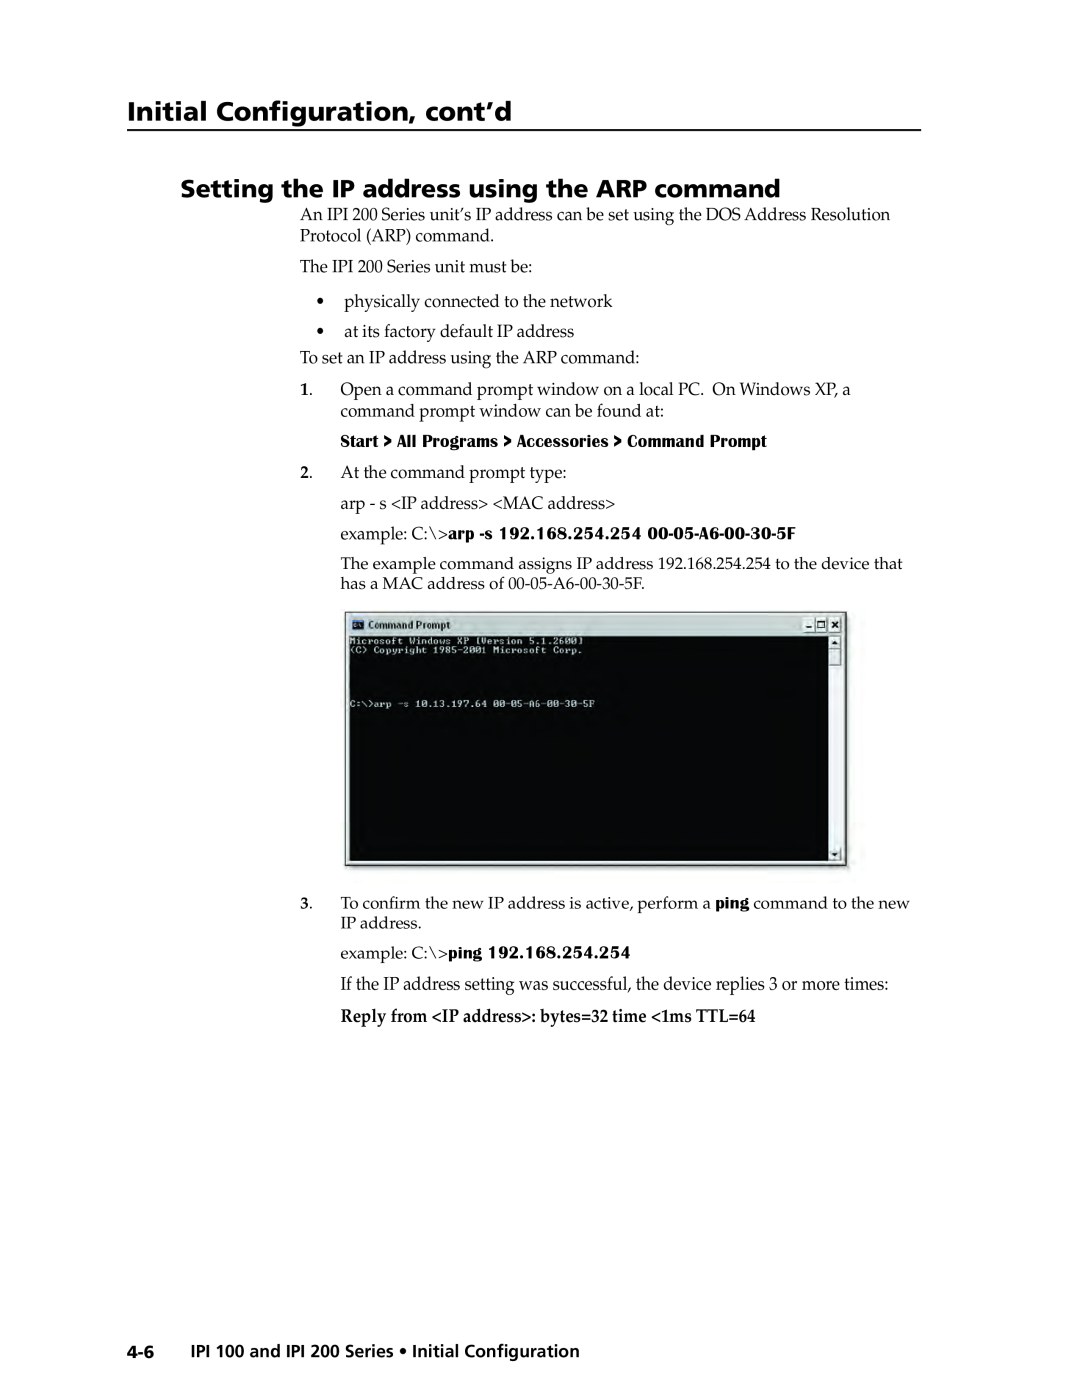 Extron electronic IPI 100 Setting the IP address using the ARP command, Initial Configuration, cont’d, example C\ping 